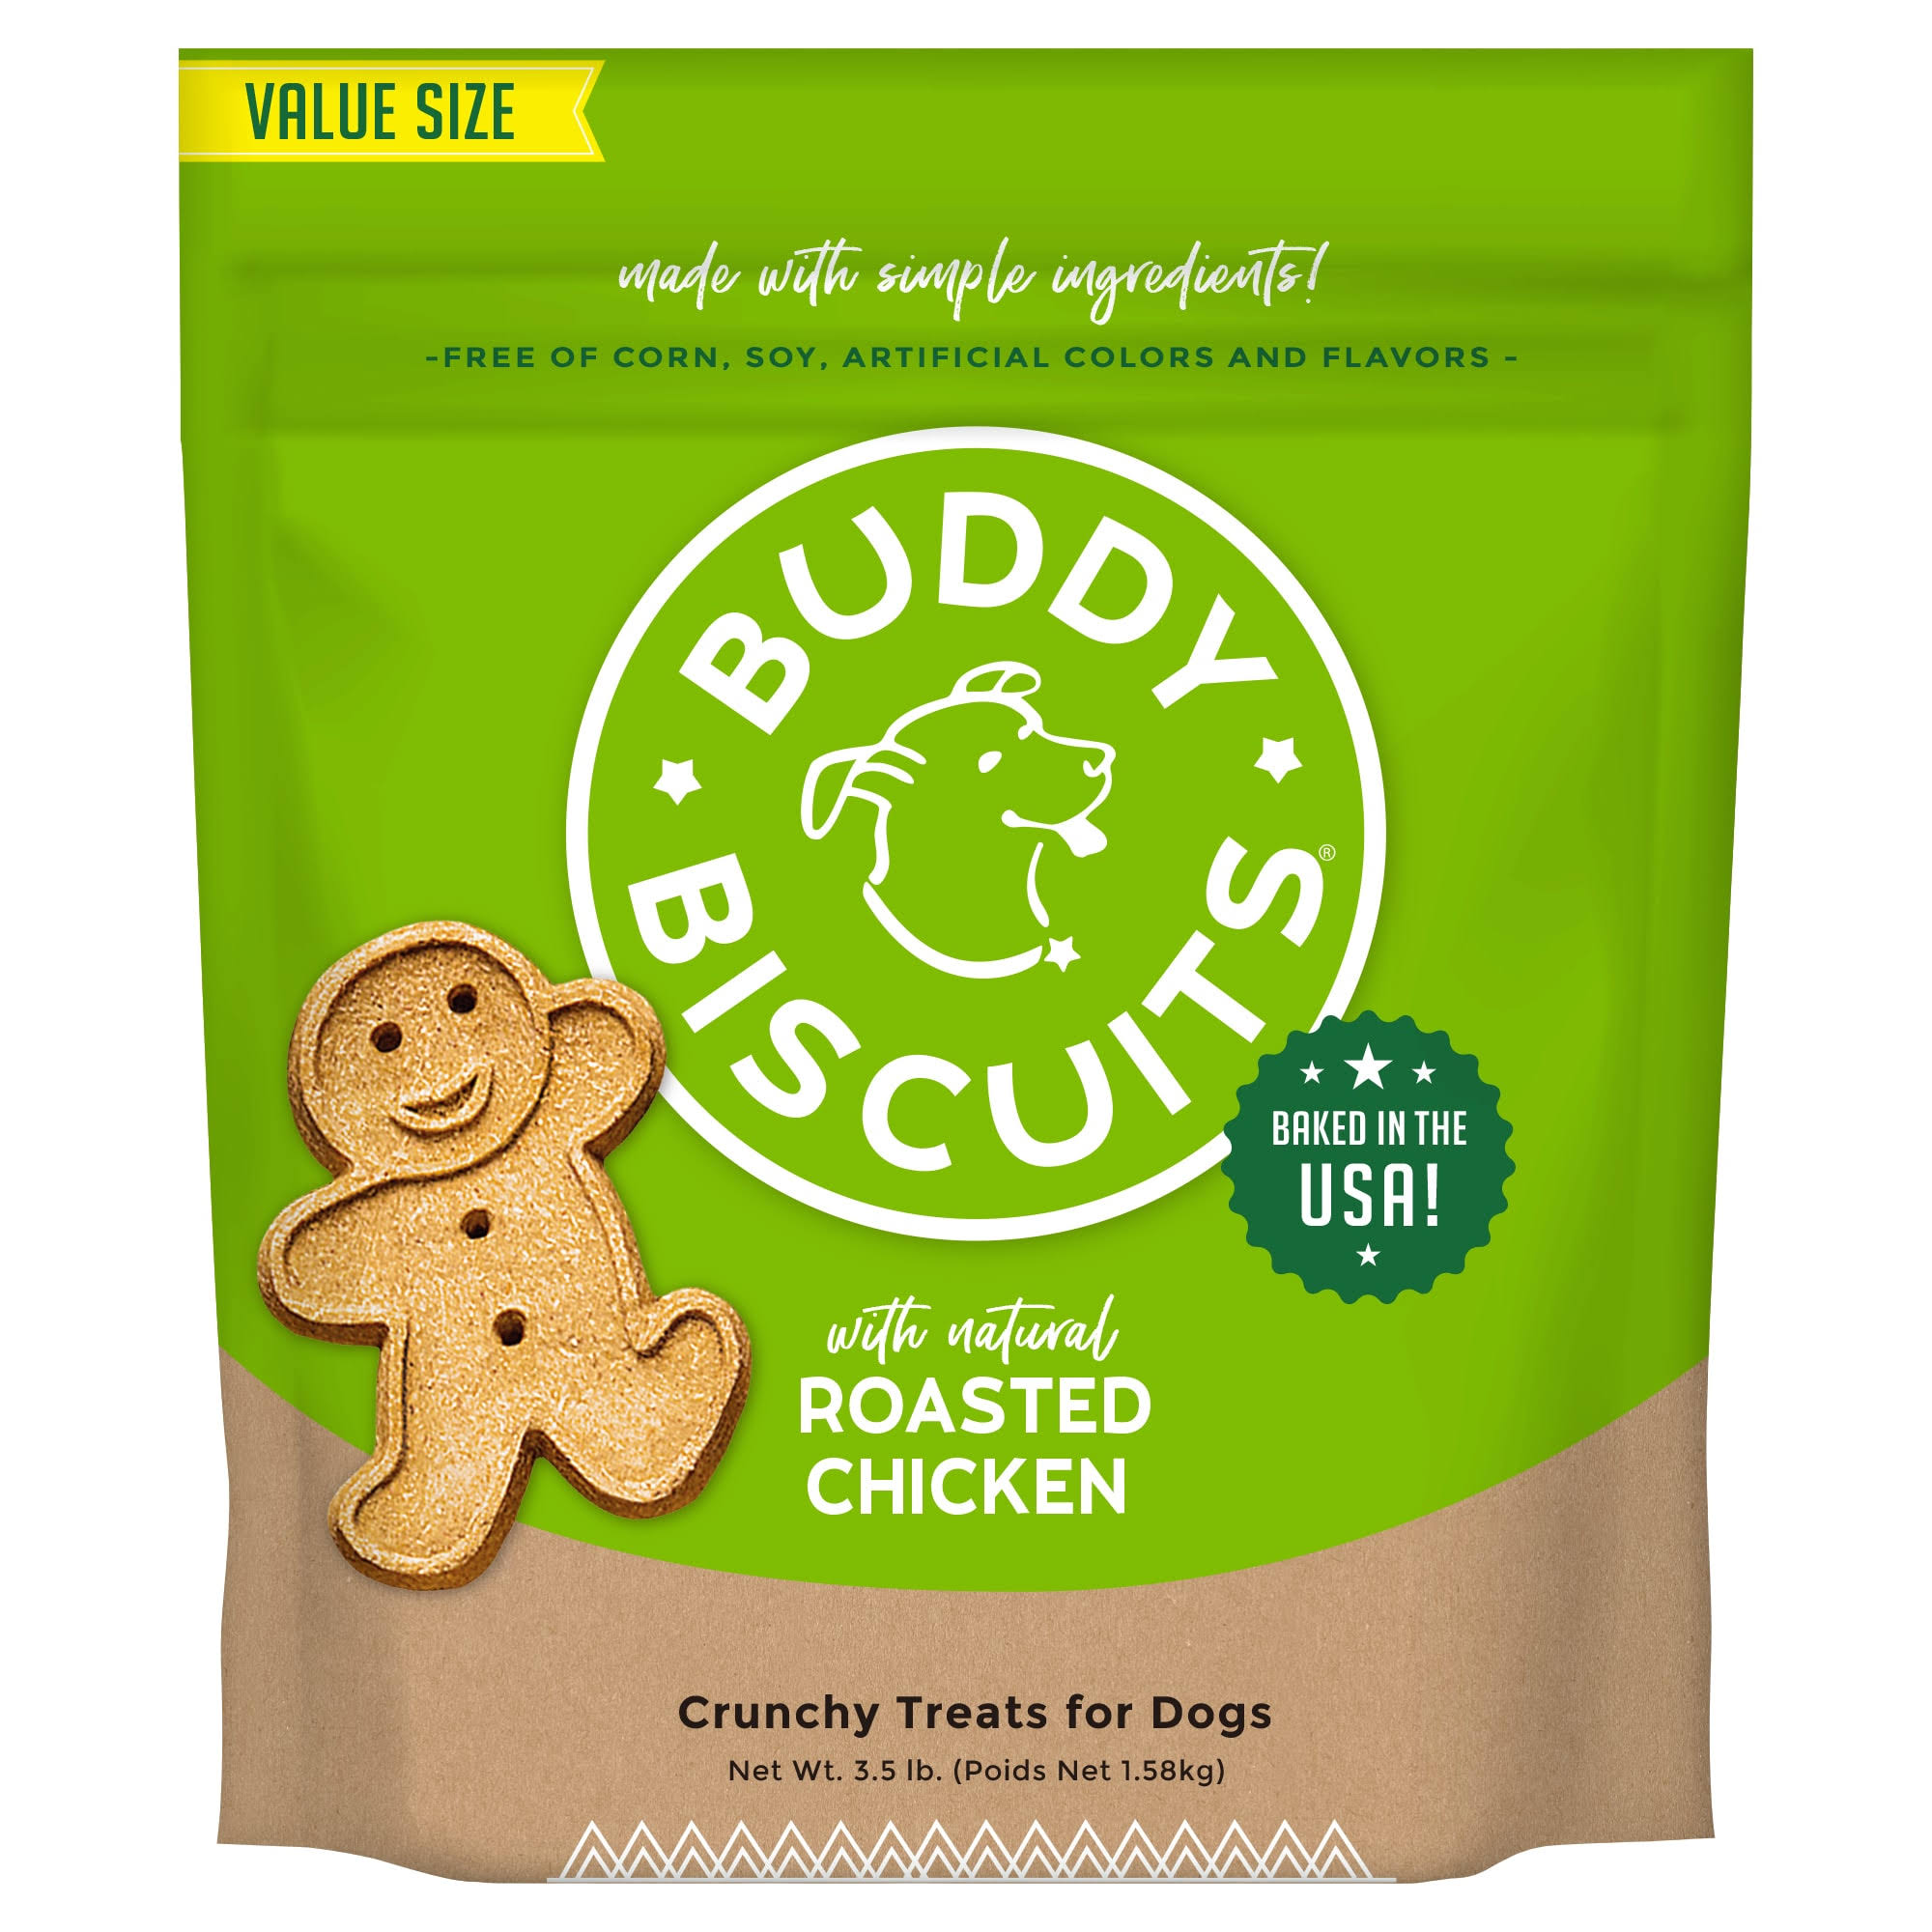 Buddy Biscuits Oven-Baked